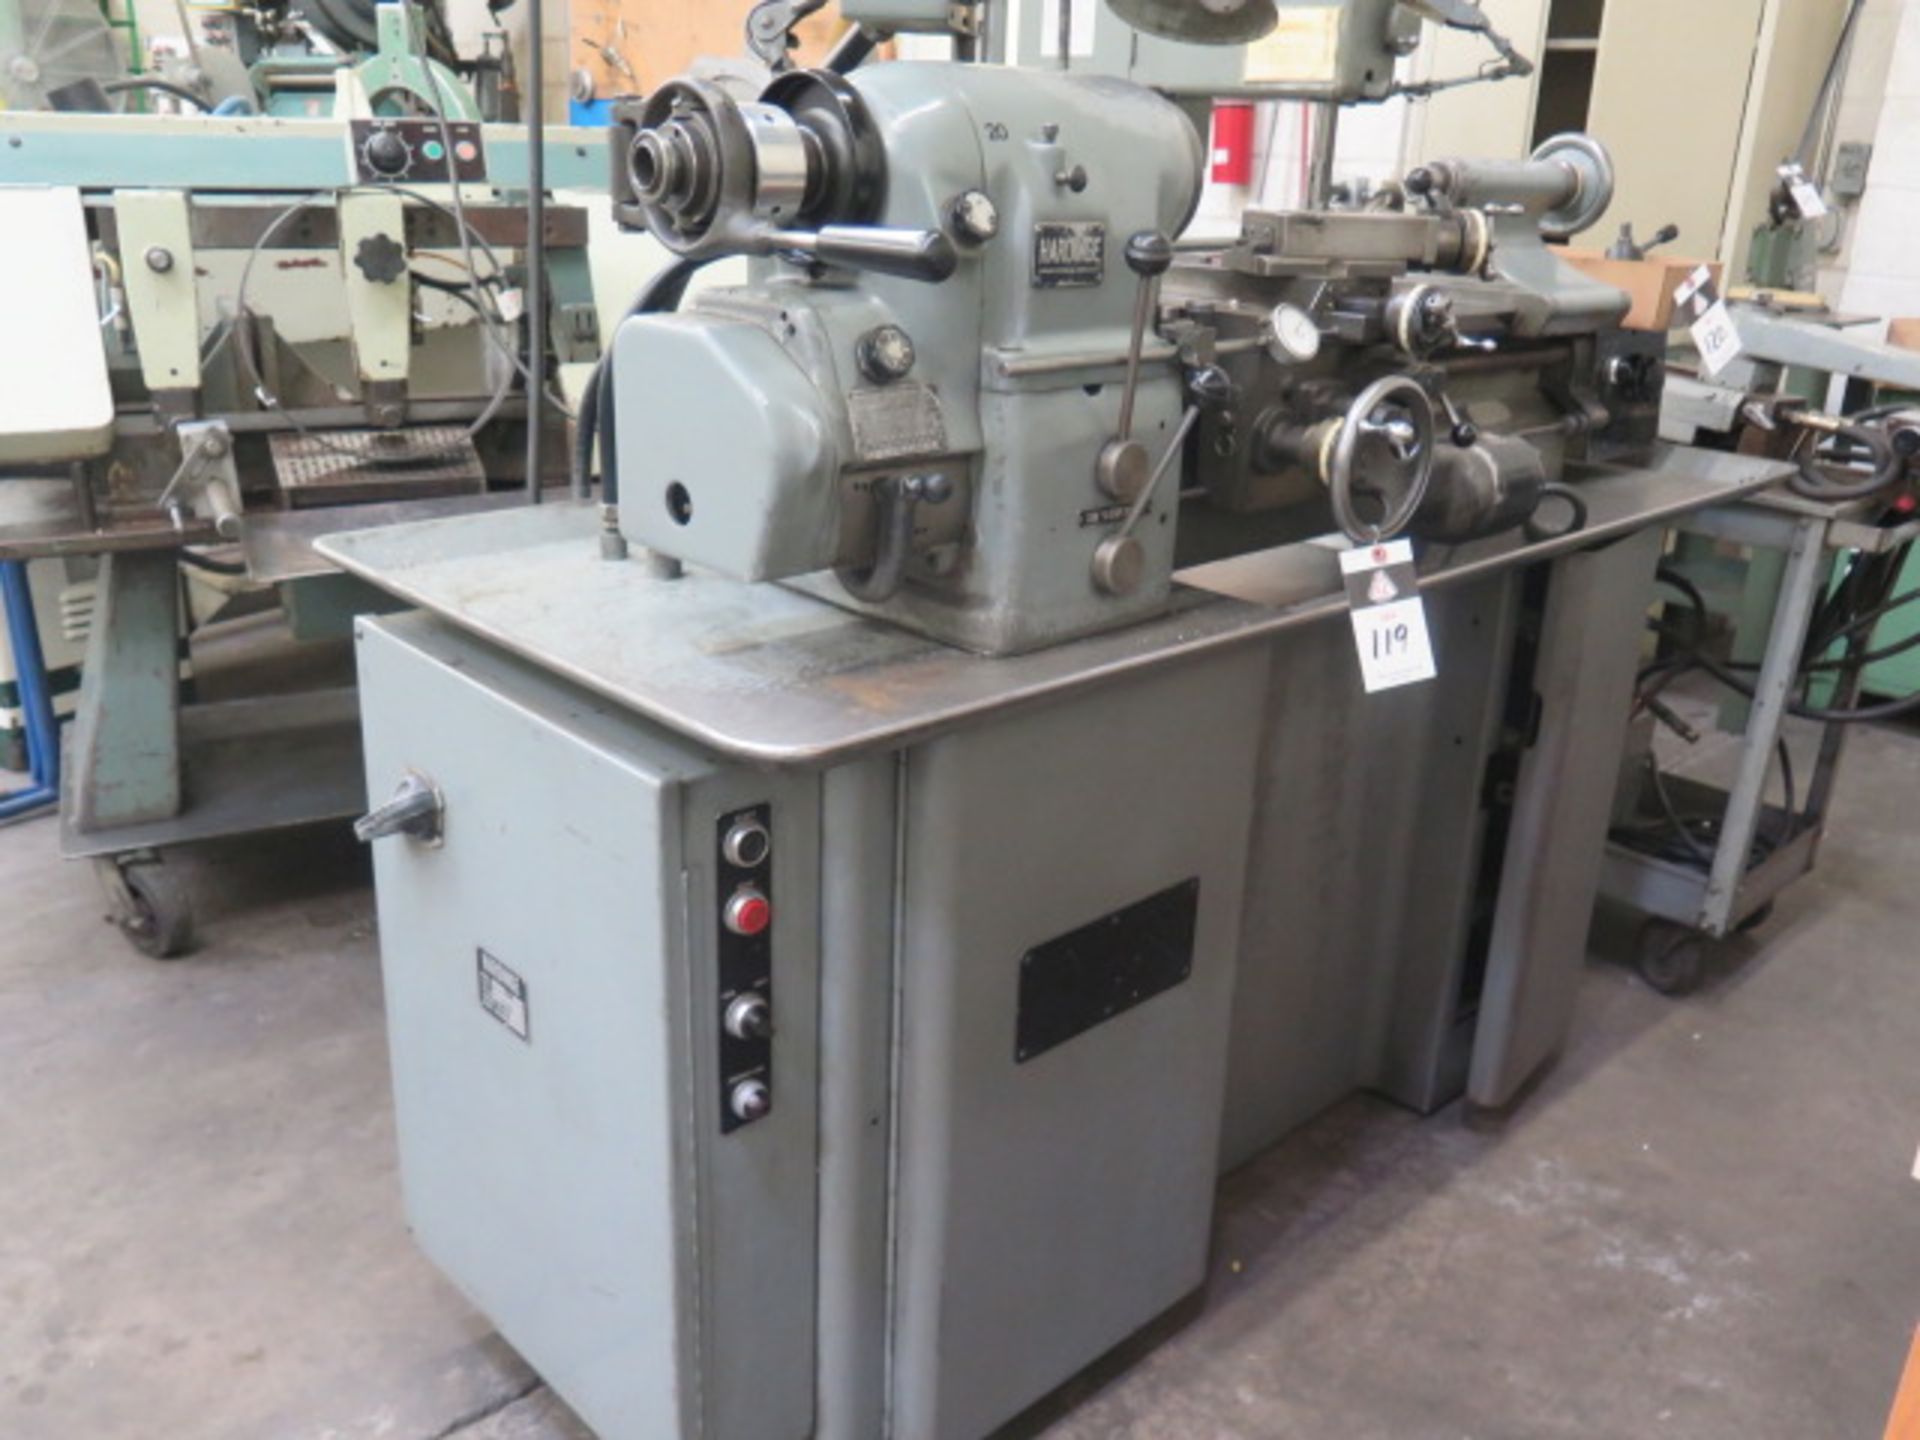 Hardinge HLV-H Tool Room Lathe s/n HLV-H-4836 w/ 125-3000 RPM, Inch Threading, Tailstock, SOLD AS IS - Image 2 of 14